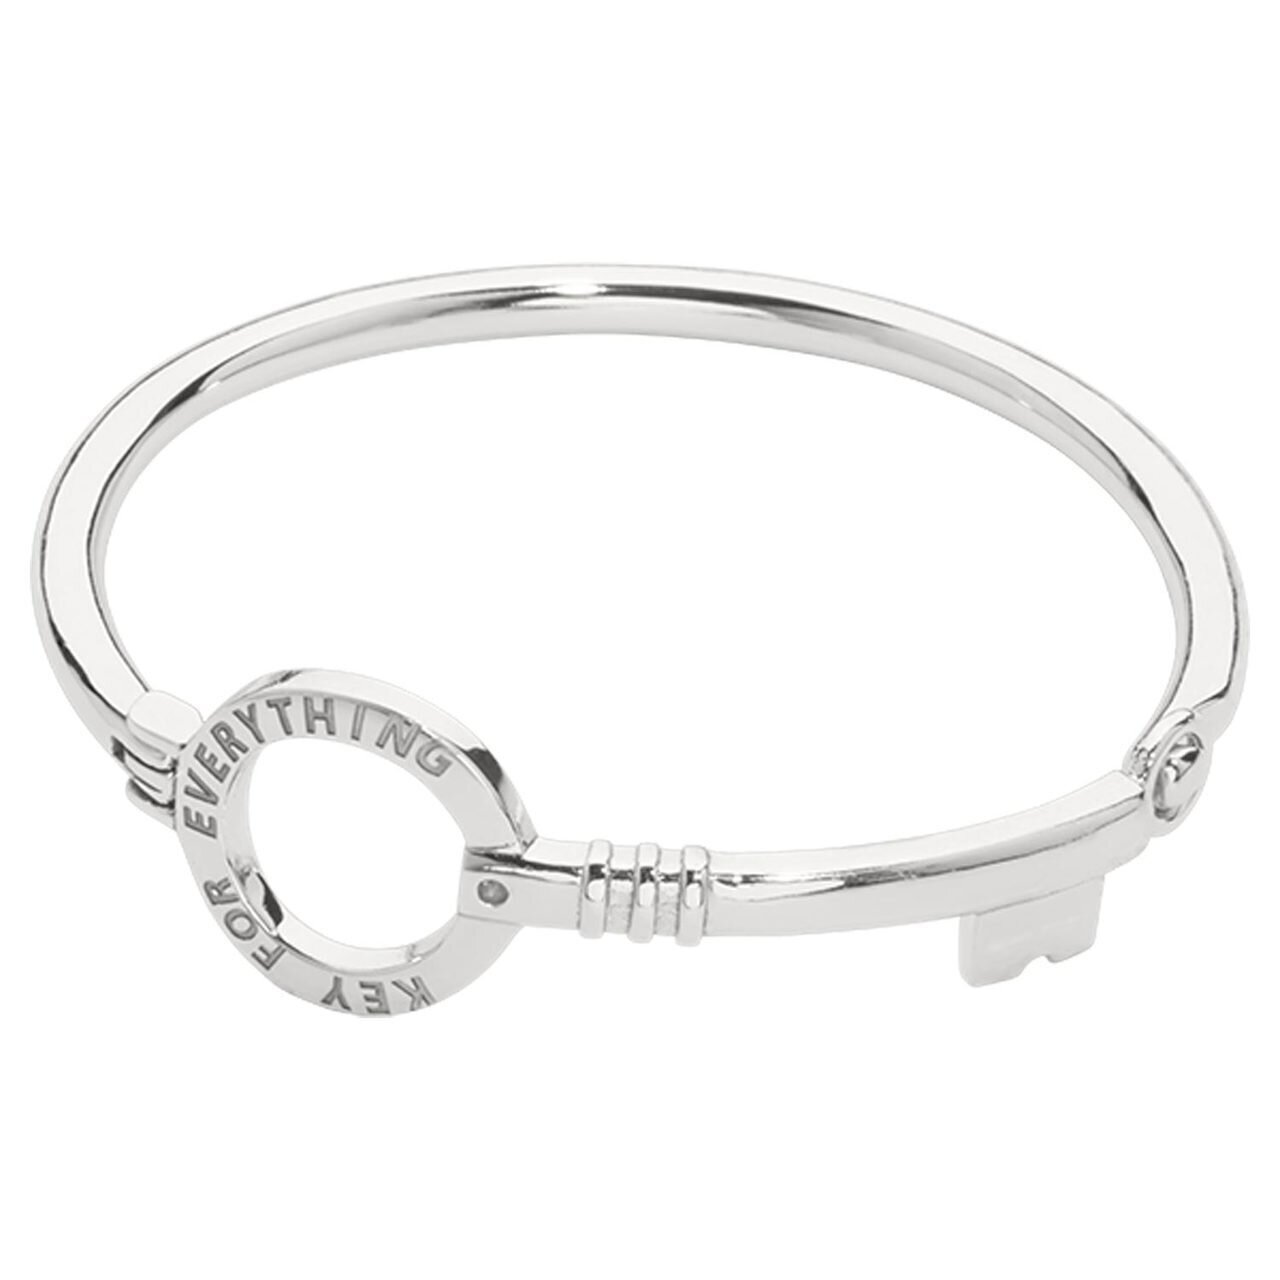 Nikki Lissoni Bracelet with Key To Everything Tag Silver-plated 19cm B1135S19